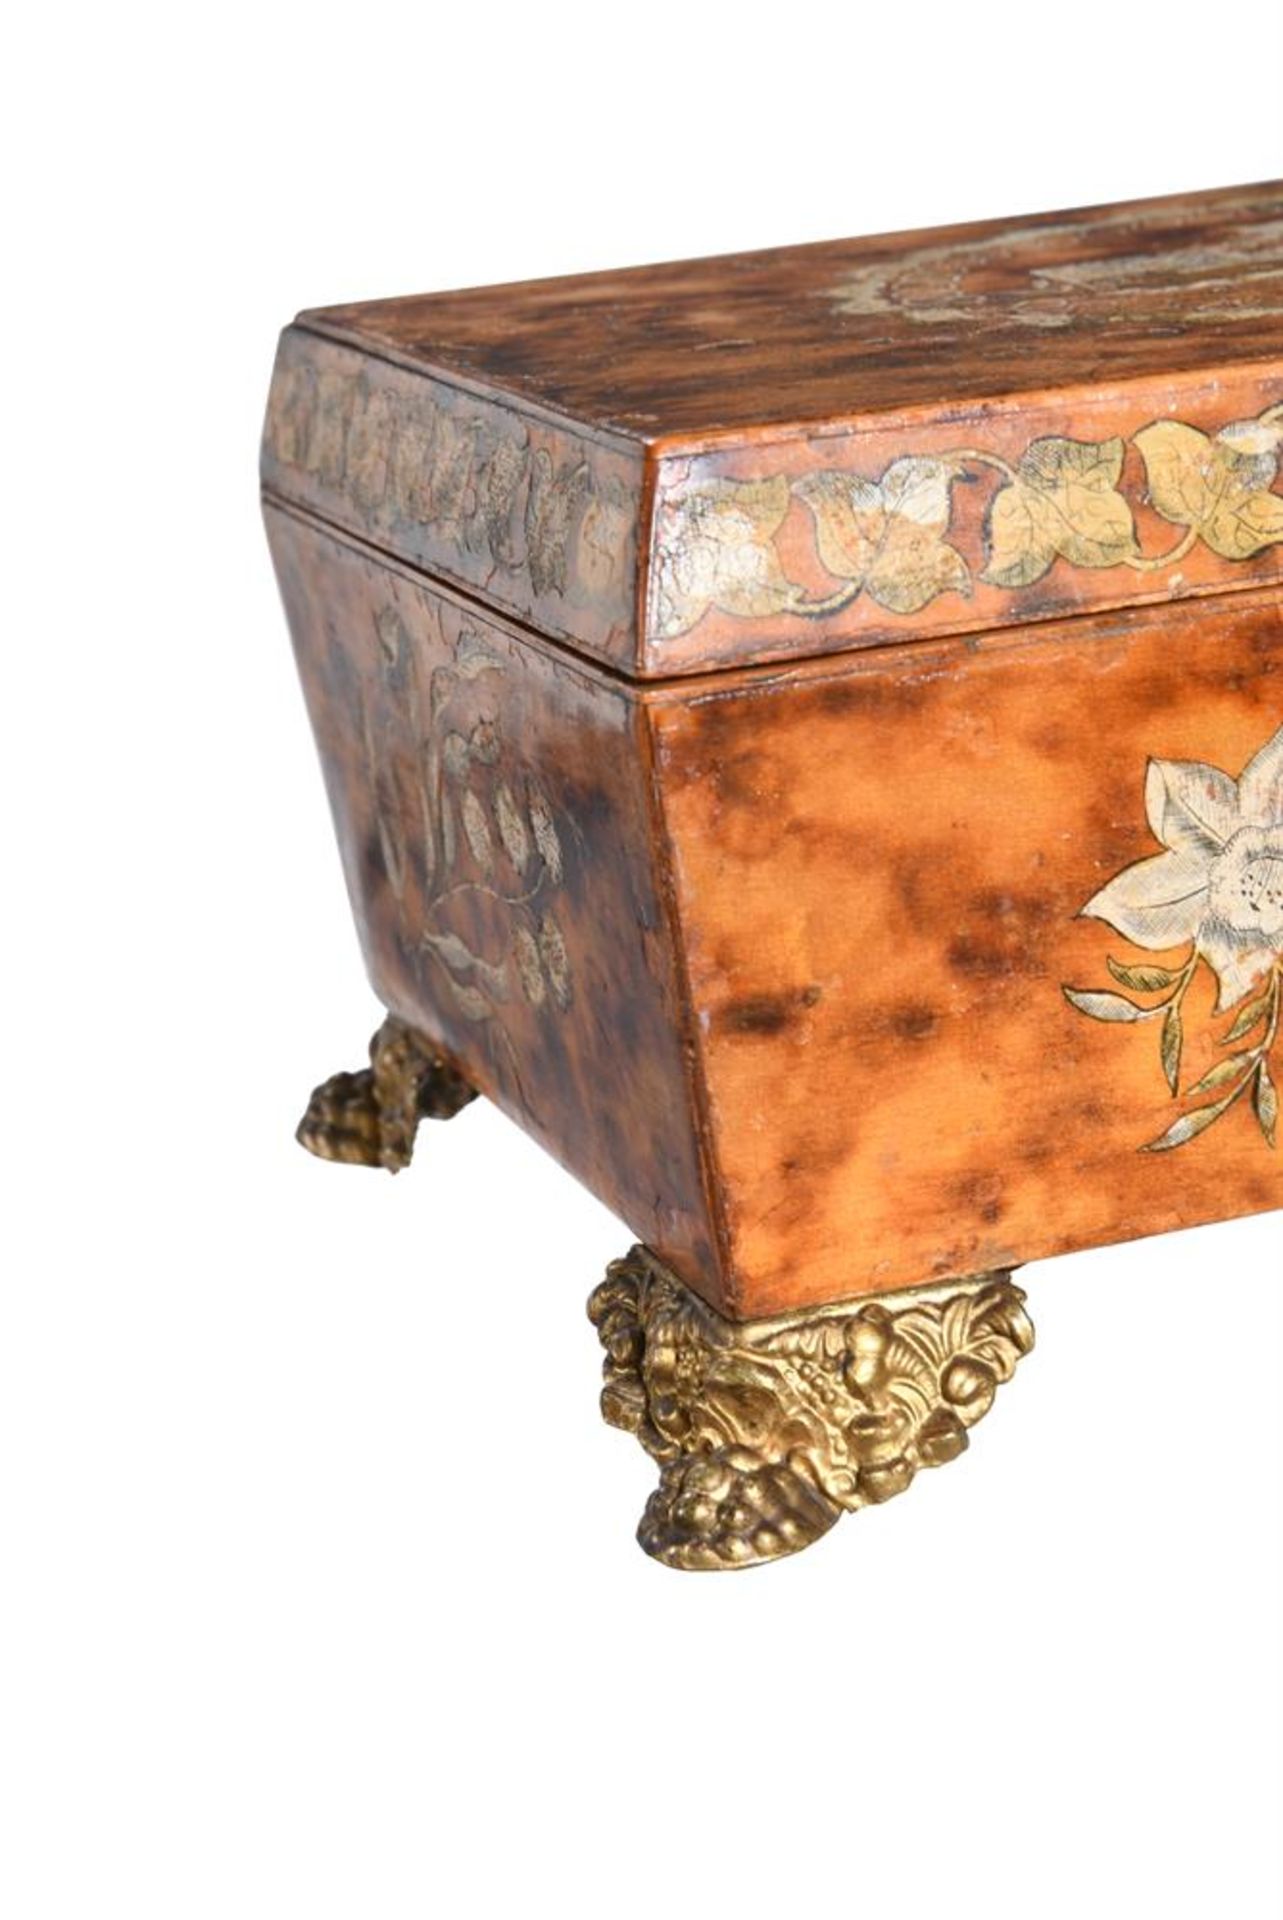 A REGENCY PAINTED FAUX BLONDE TORTOISESHELL WORKBOX, EARLY 19TH CENTURY - Image 4 of 4